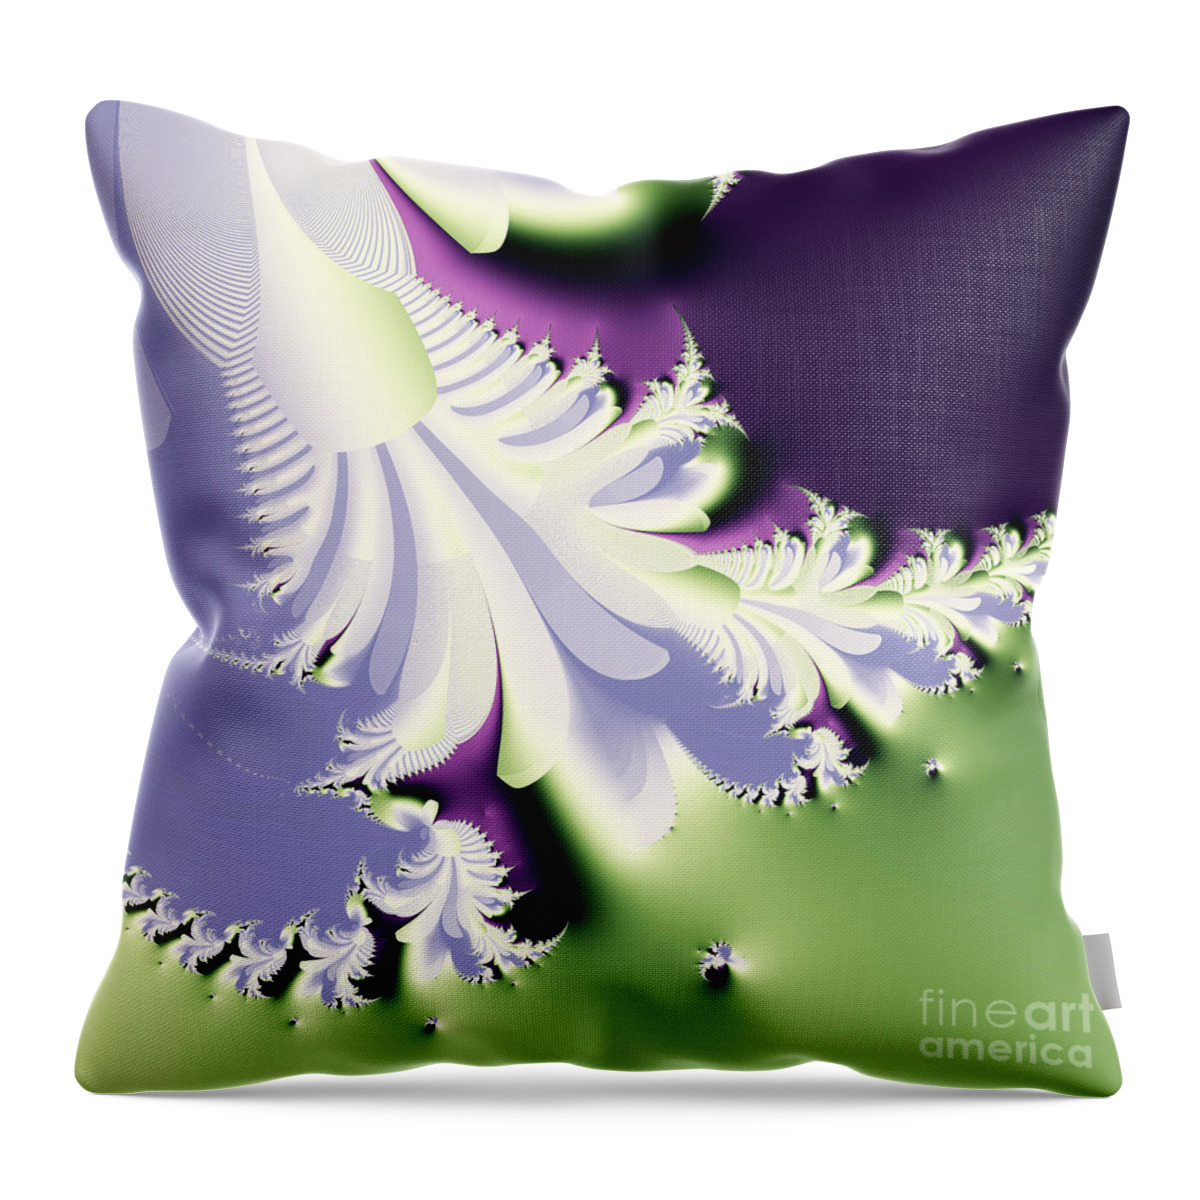 Fractal Throw Pillow featuring the digital art Phantom by Wingsdomain Art and Photography